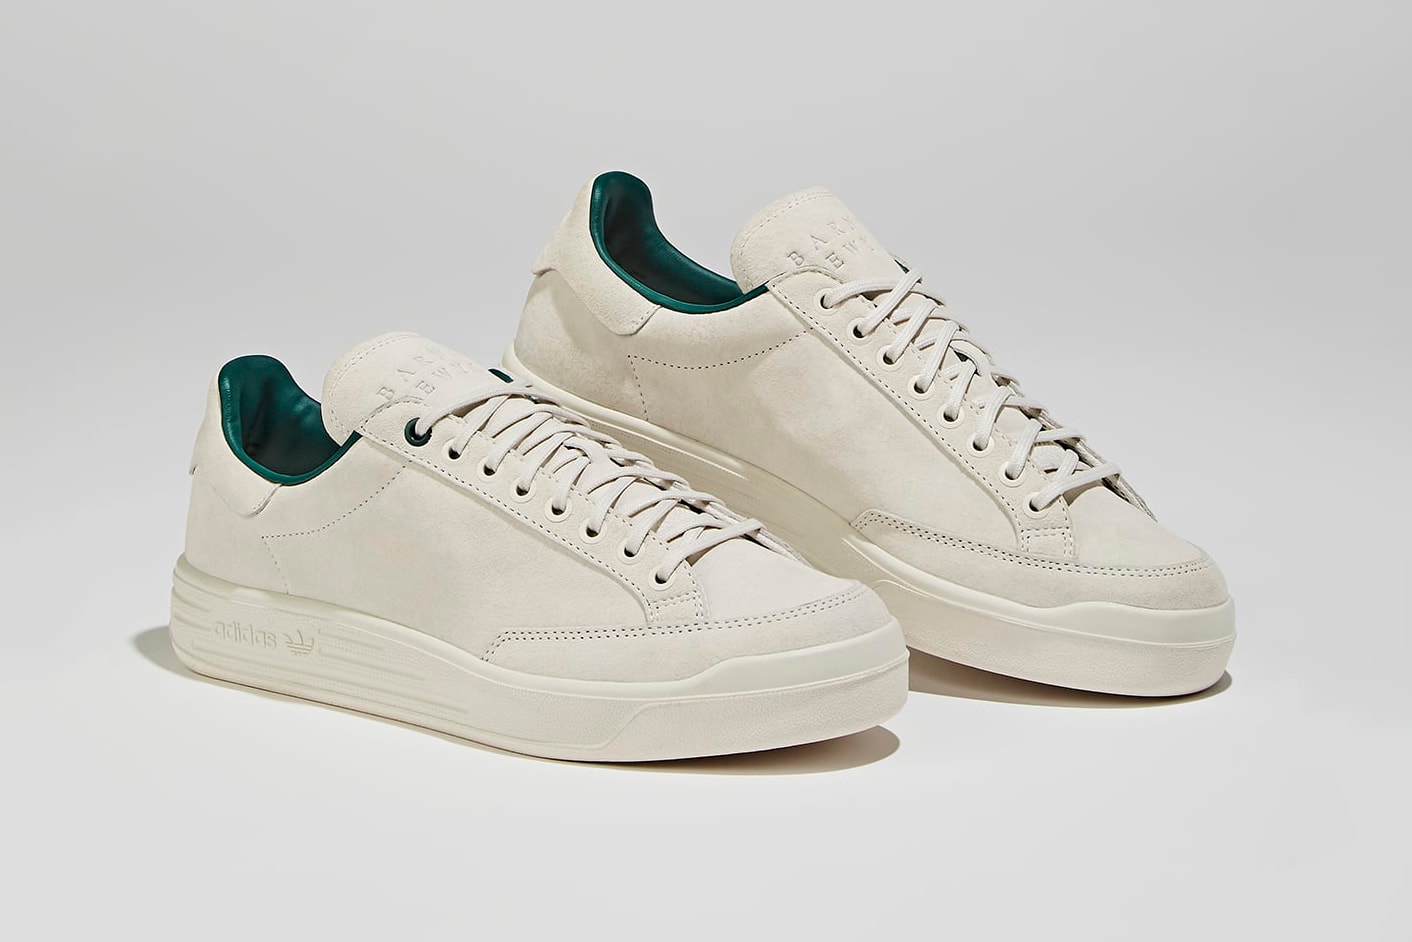 Barneys x adidas Stan Smith Rod Laver Release Date Off White Green Colorway Pricing Info Availability Sole Series